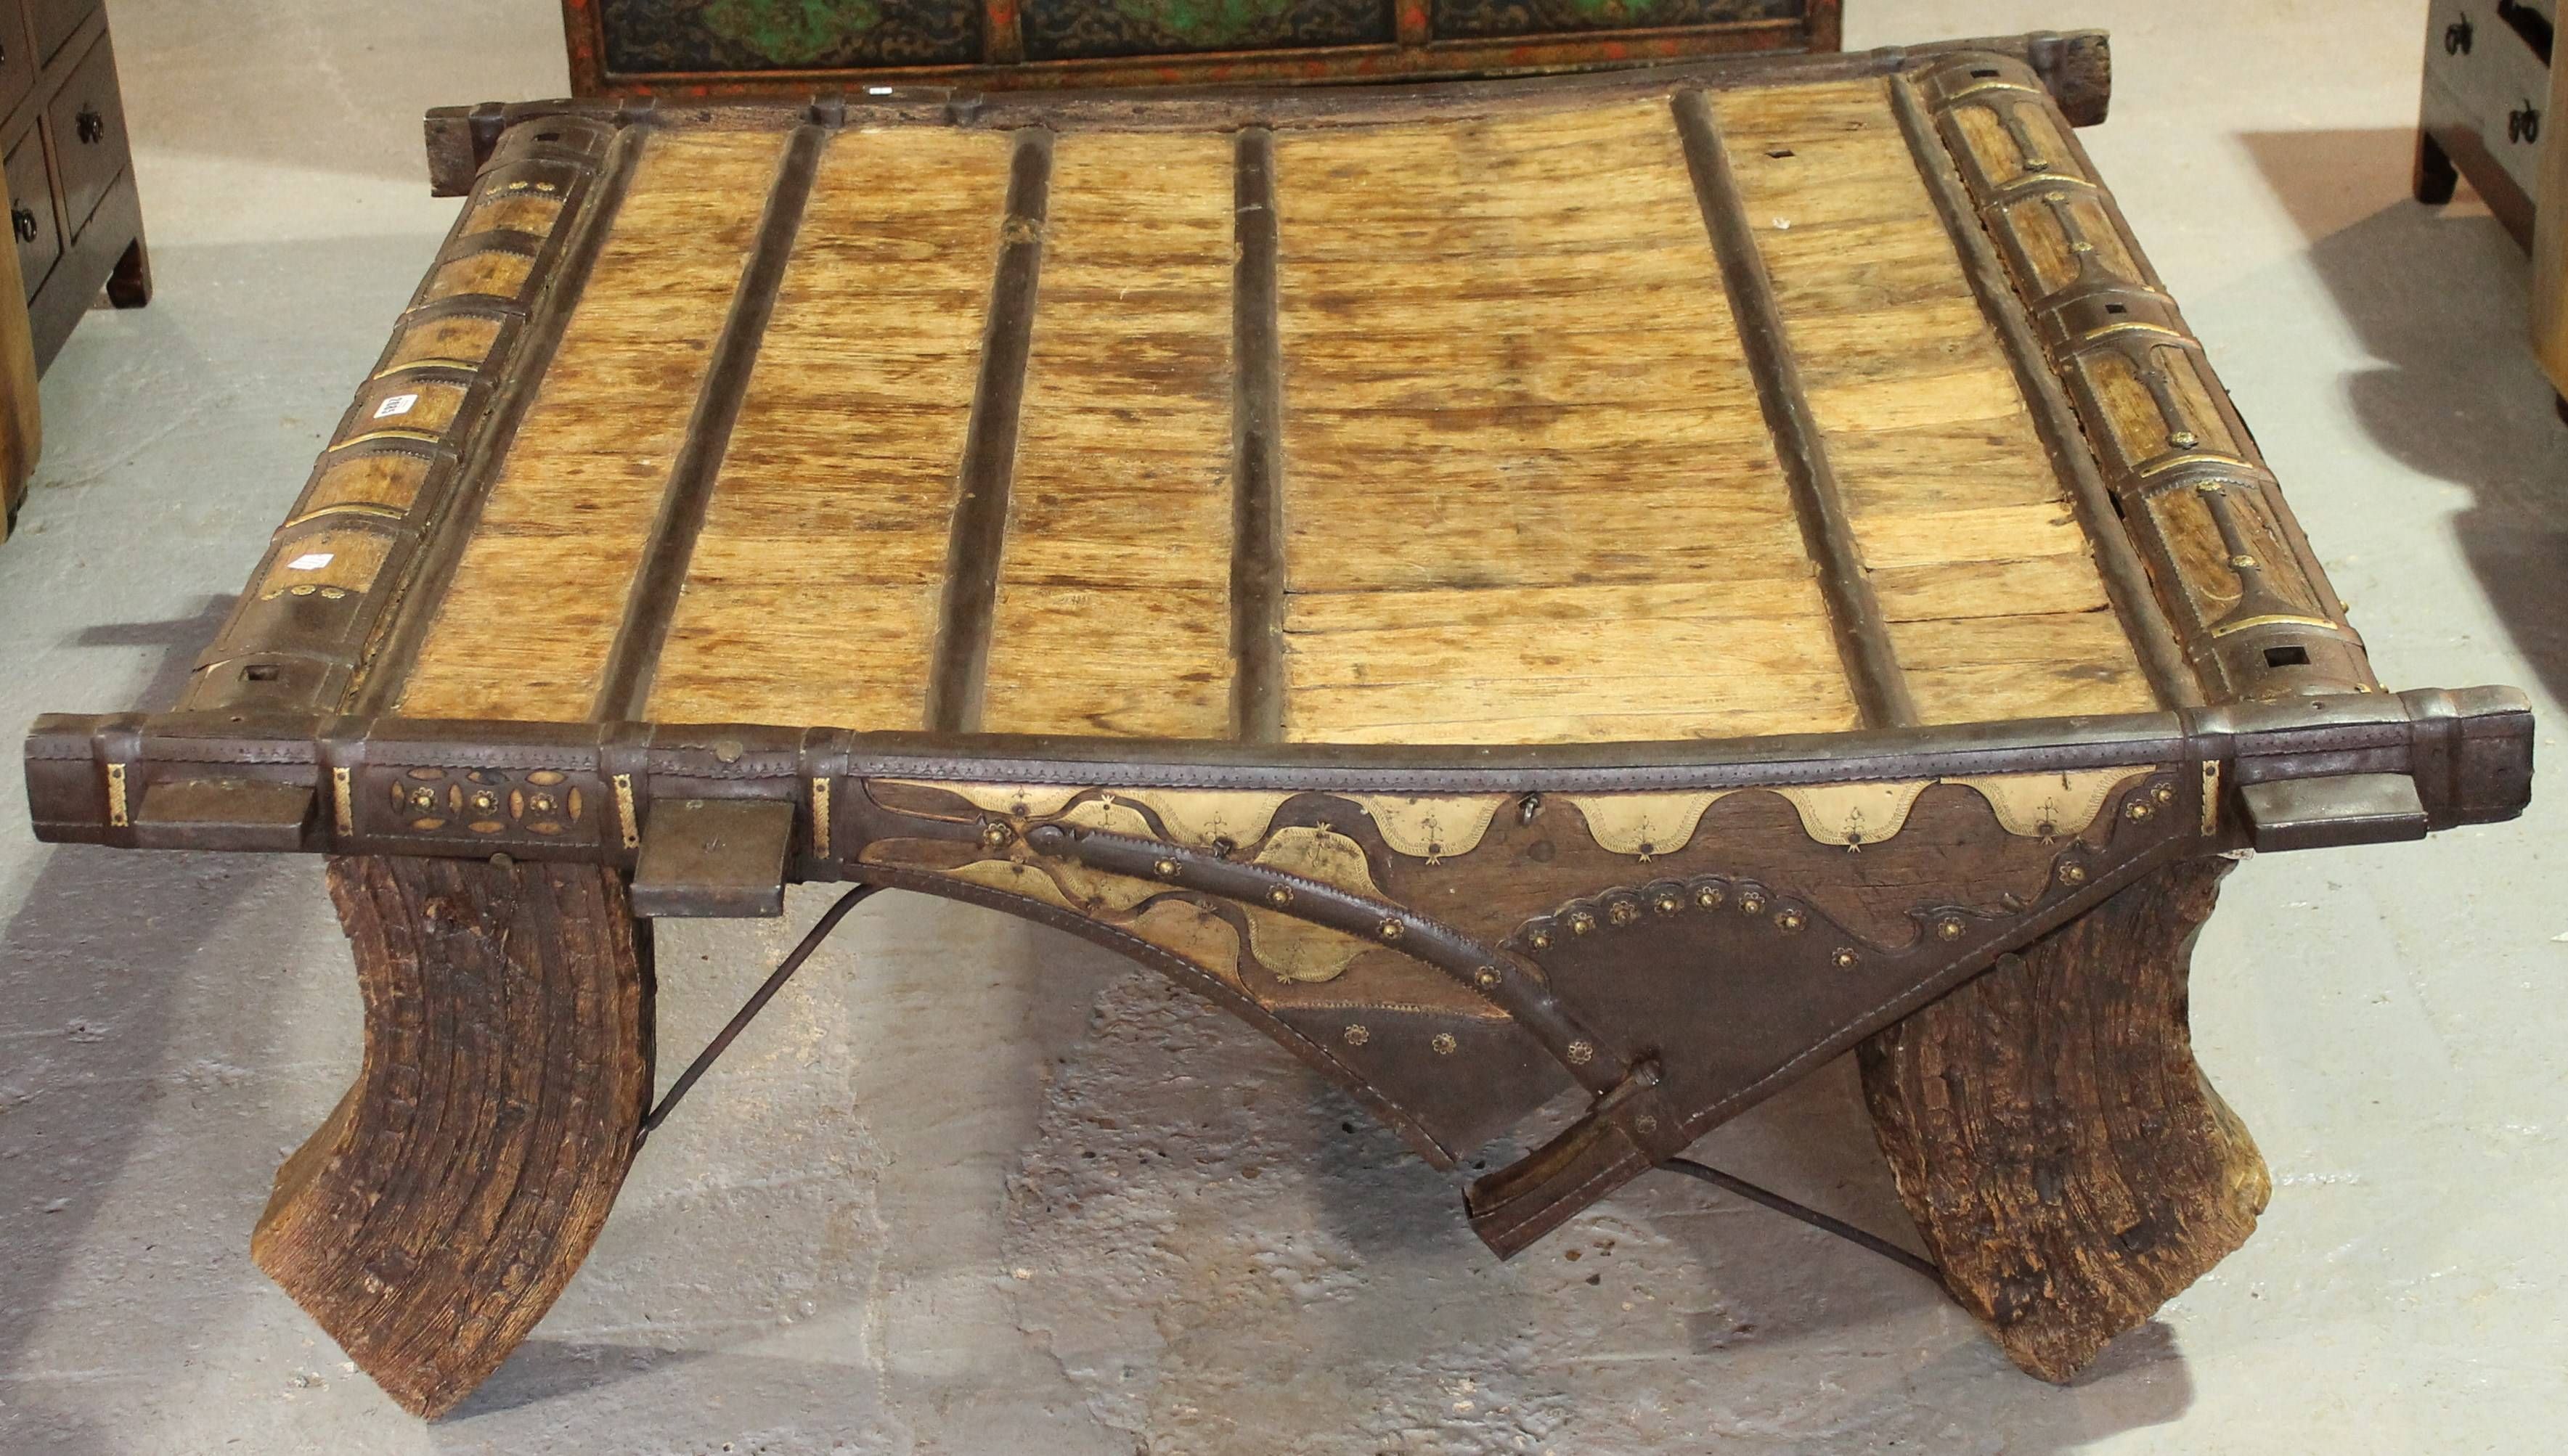 A 19th Century Iron Bound Hardwood Coffee Table/ Elephant Saddle With Regard To Elephant Coffee Tables (View 26 of 30)